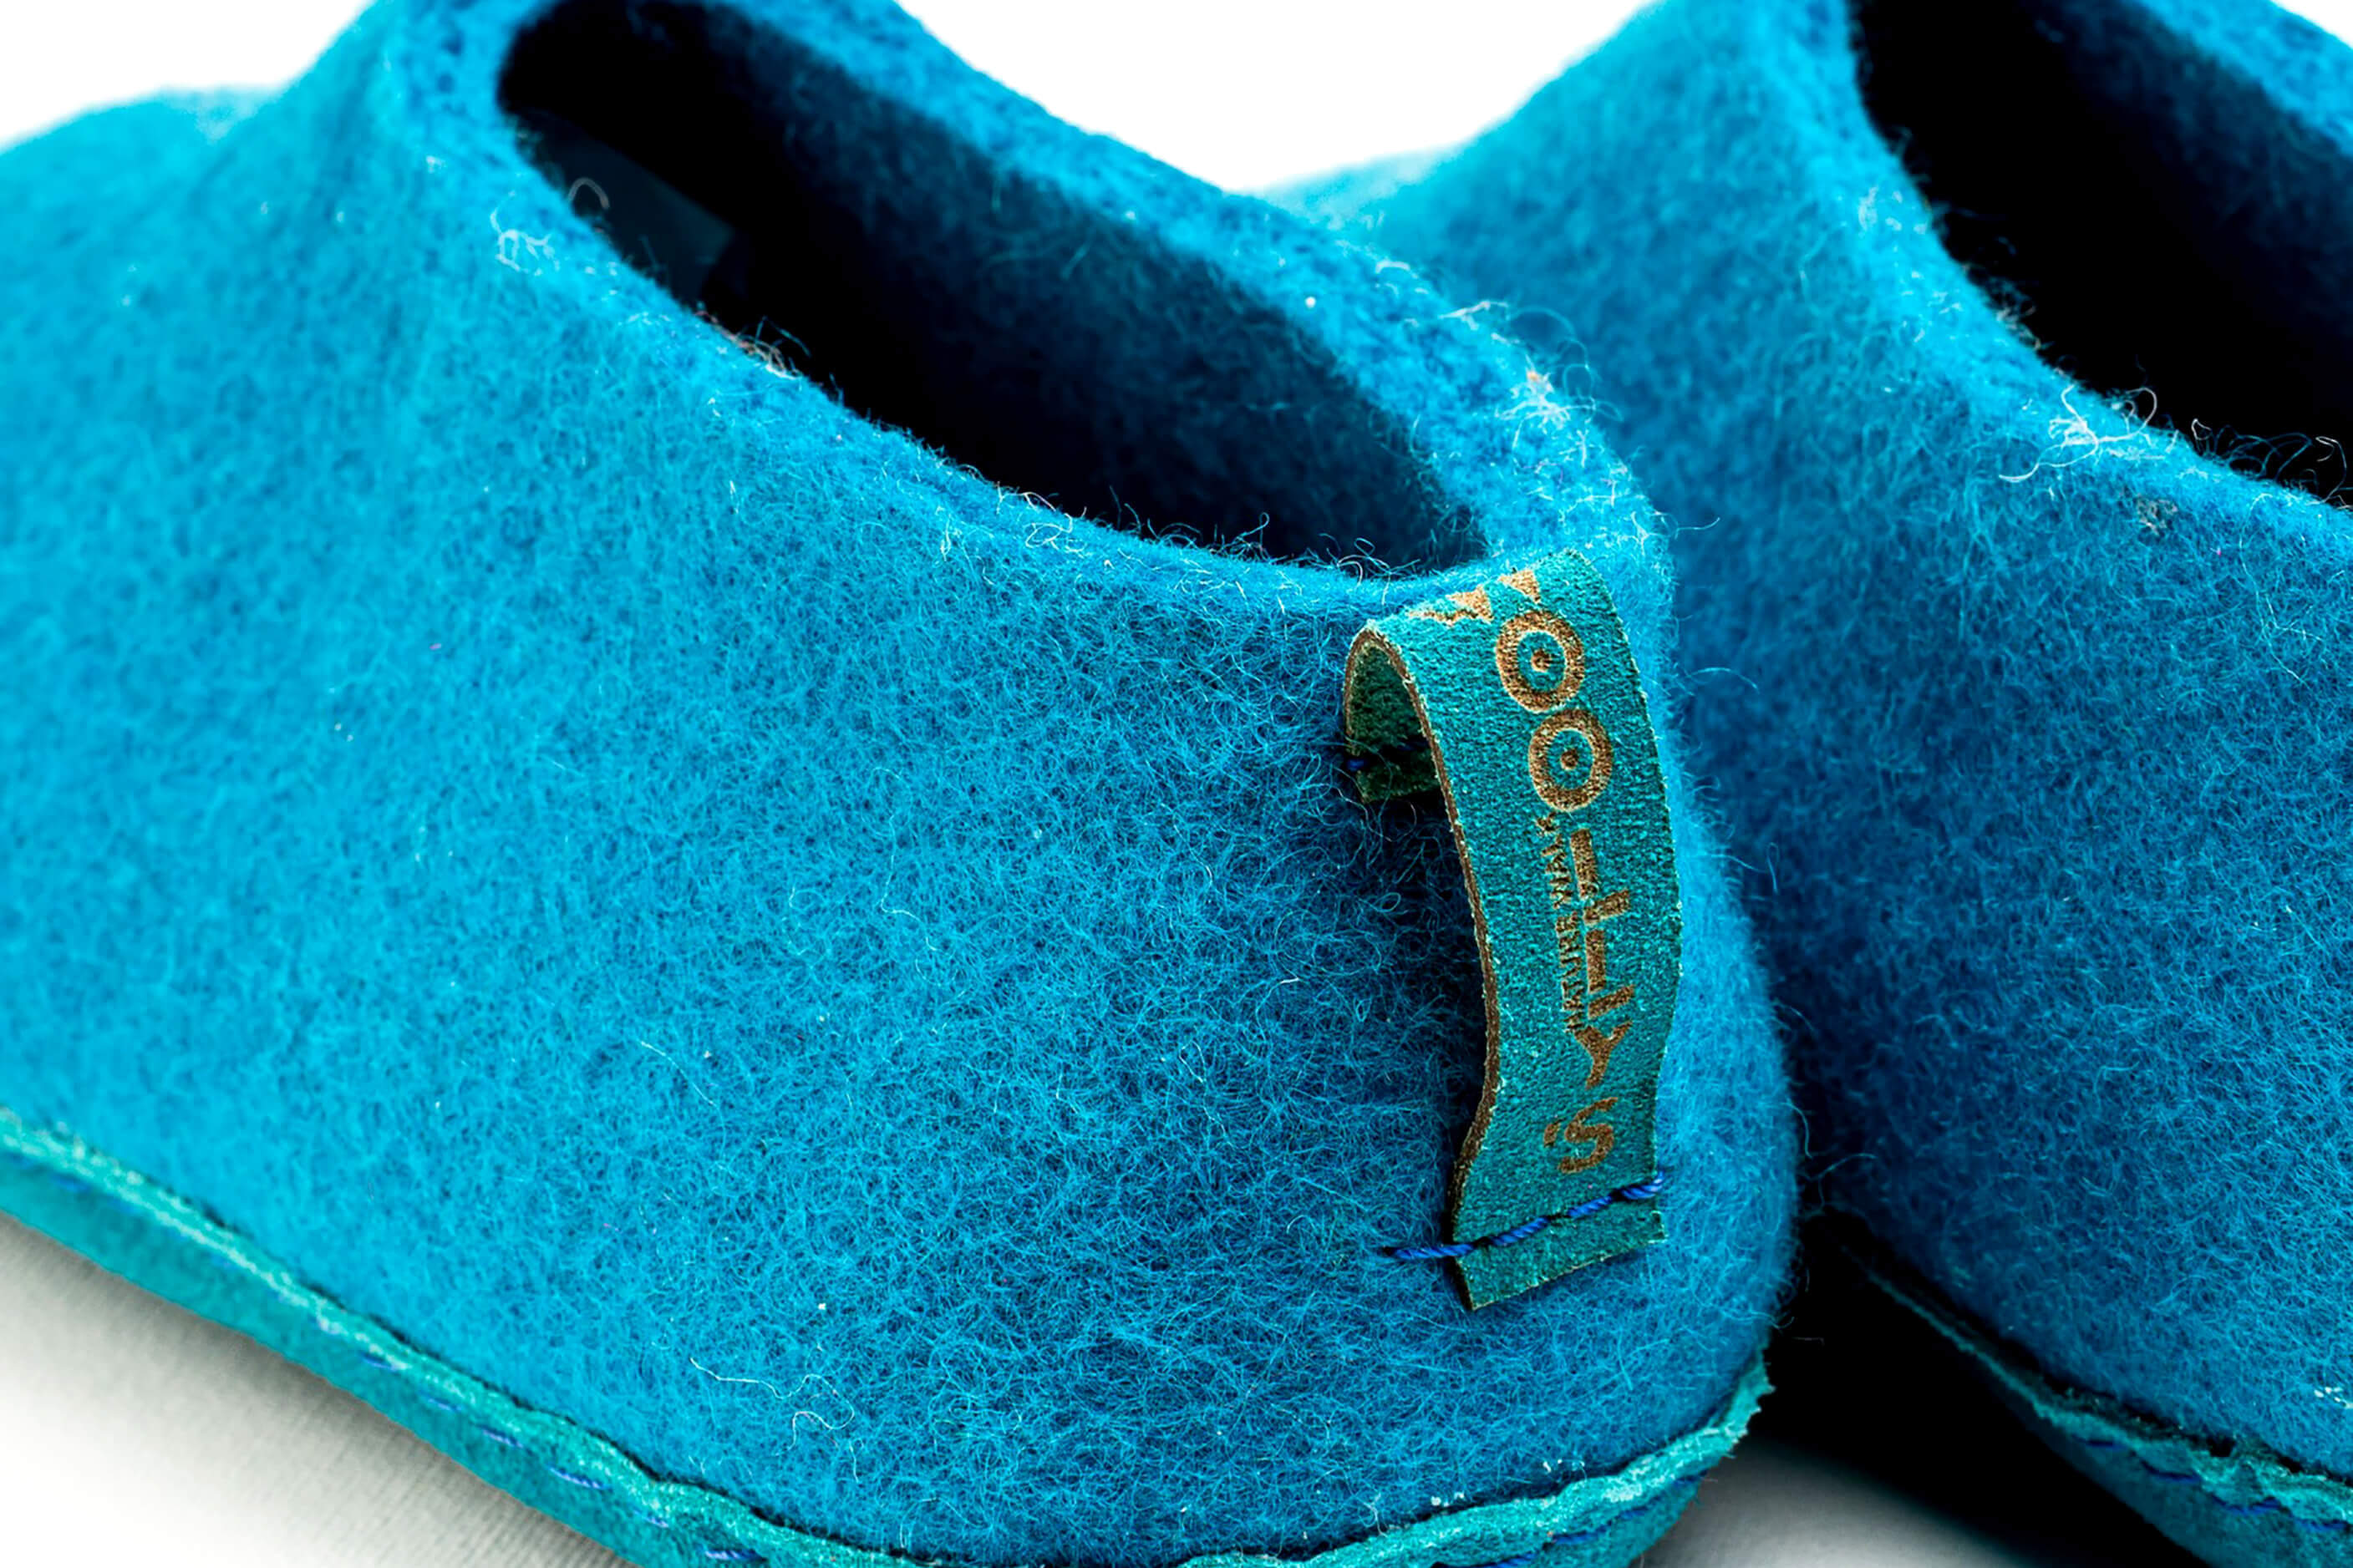 Indoor Shoes With Leather Sole - Turquoise